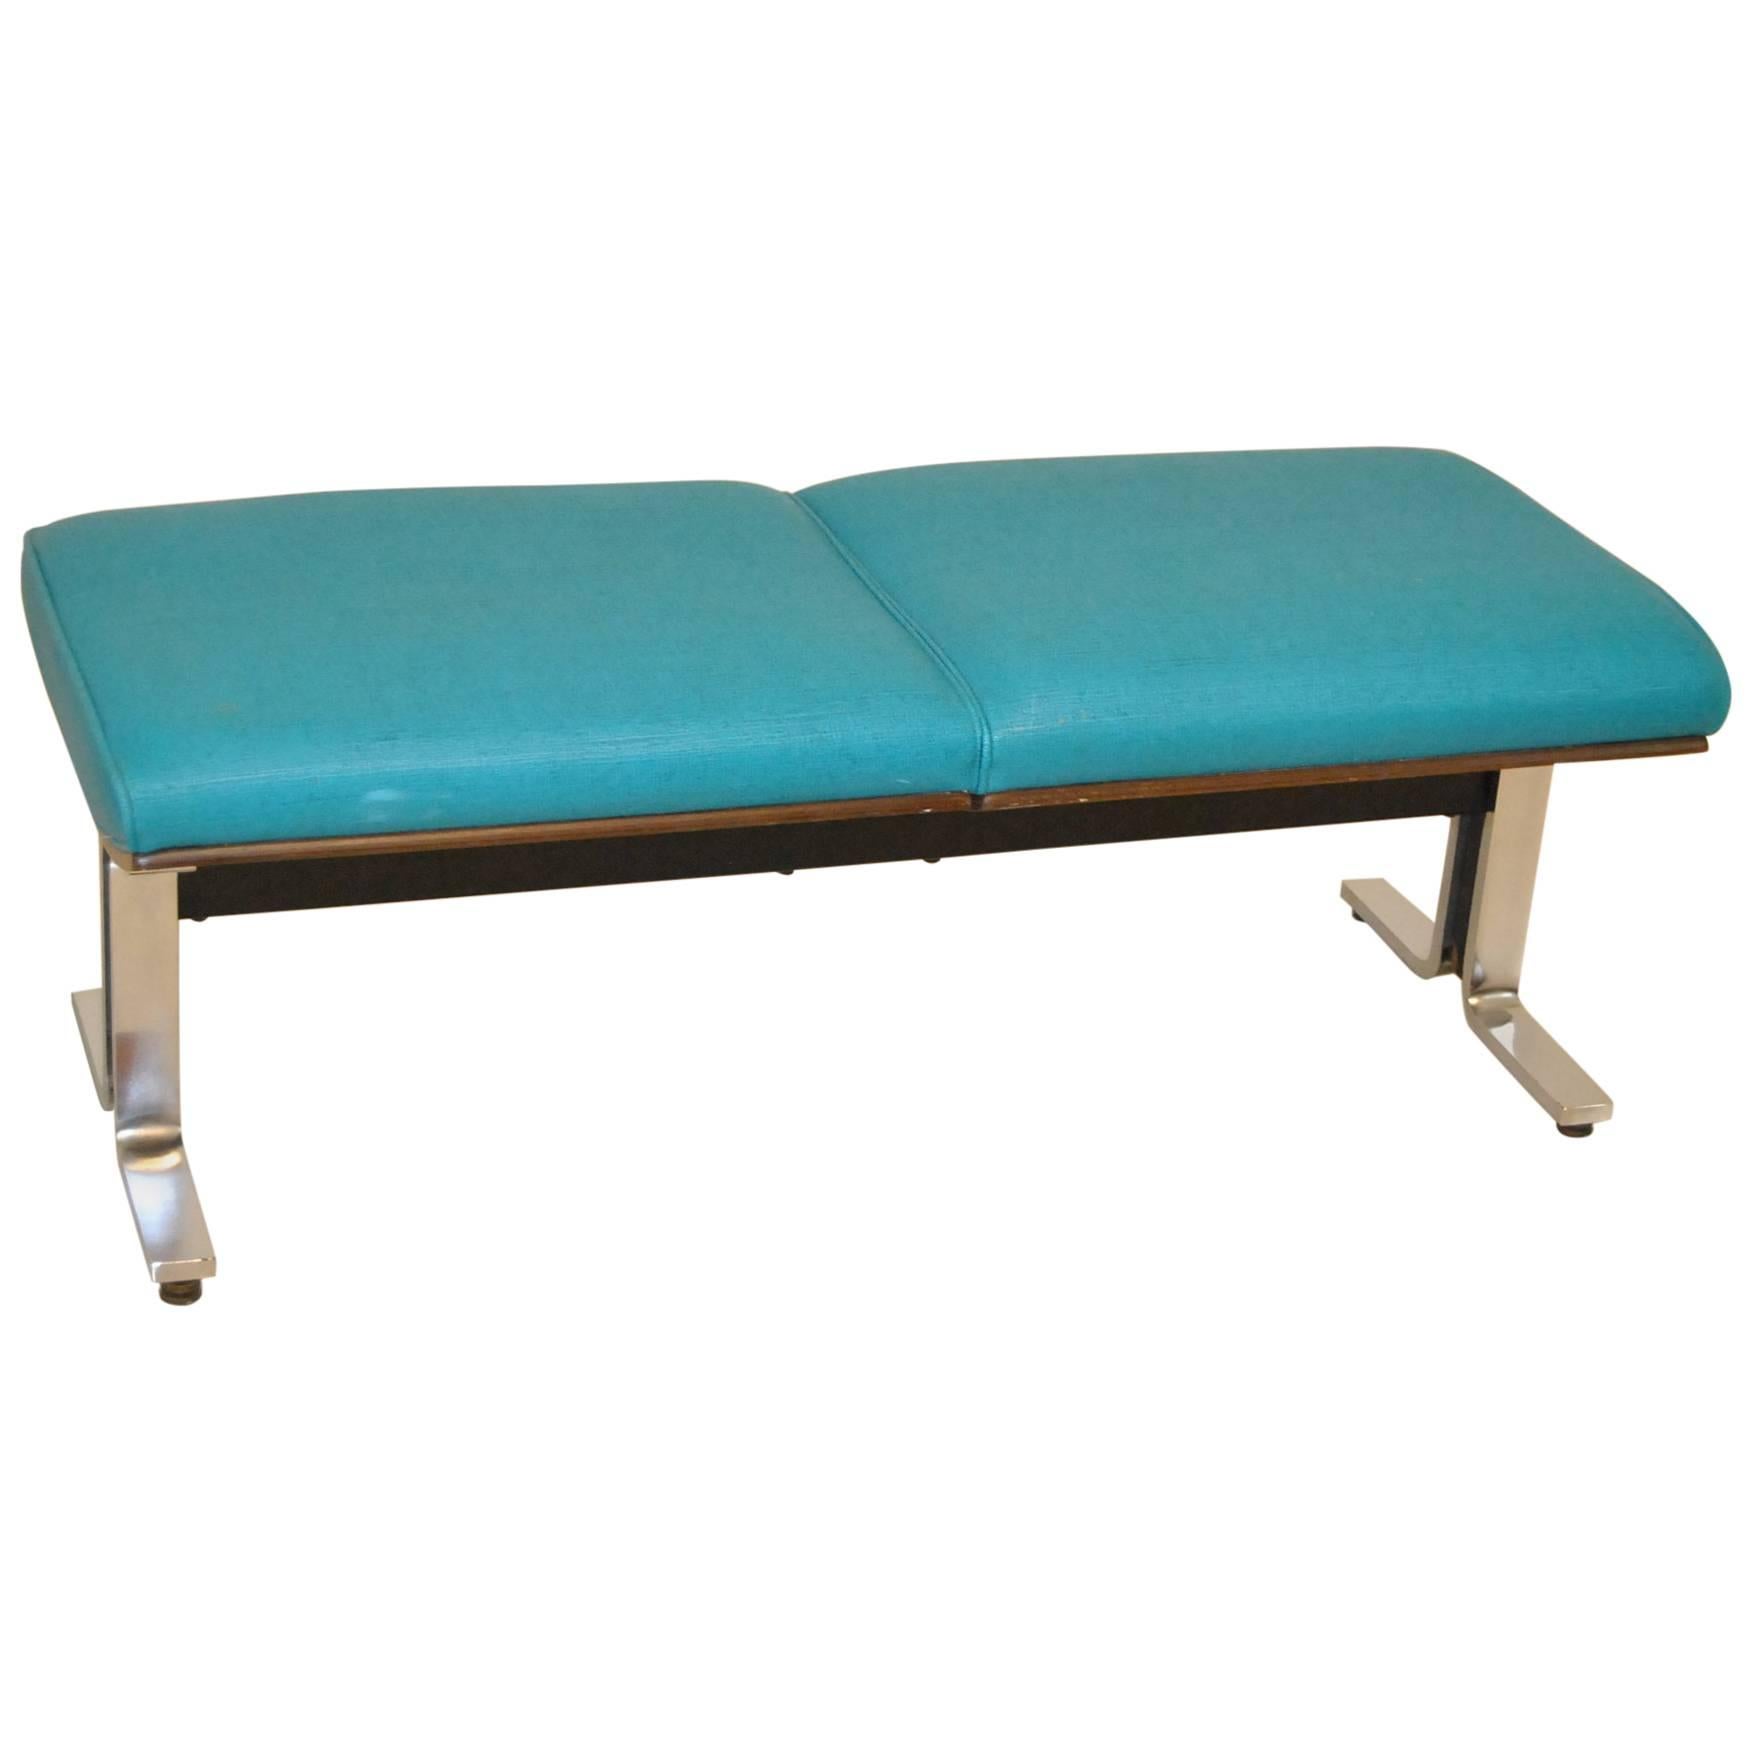 Turquoise Upholstered Bench Attributed to Thonet Steel Chrome